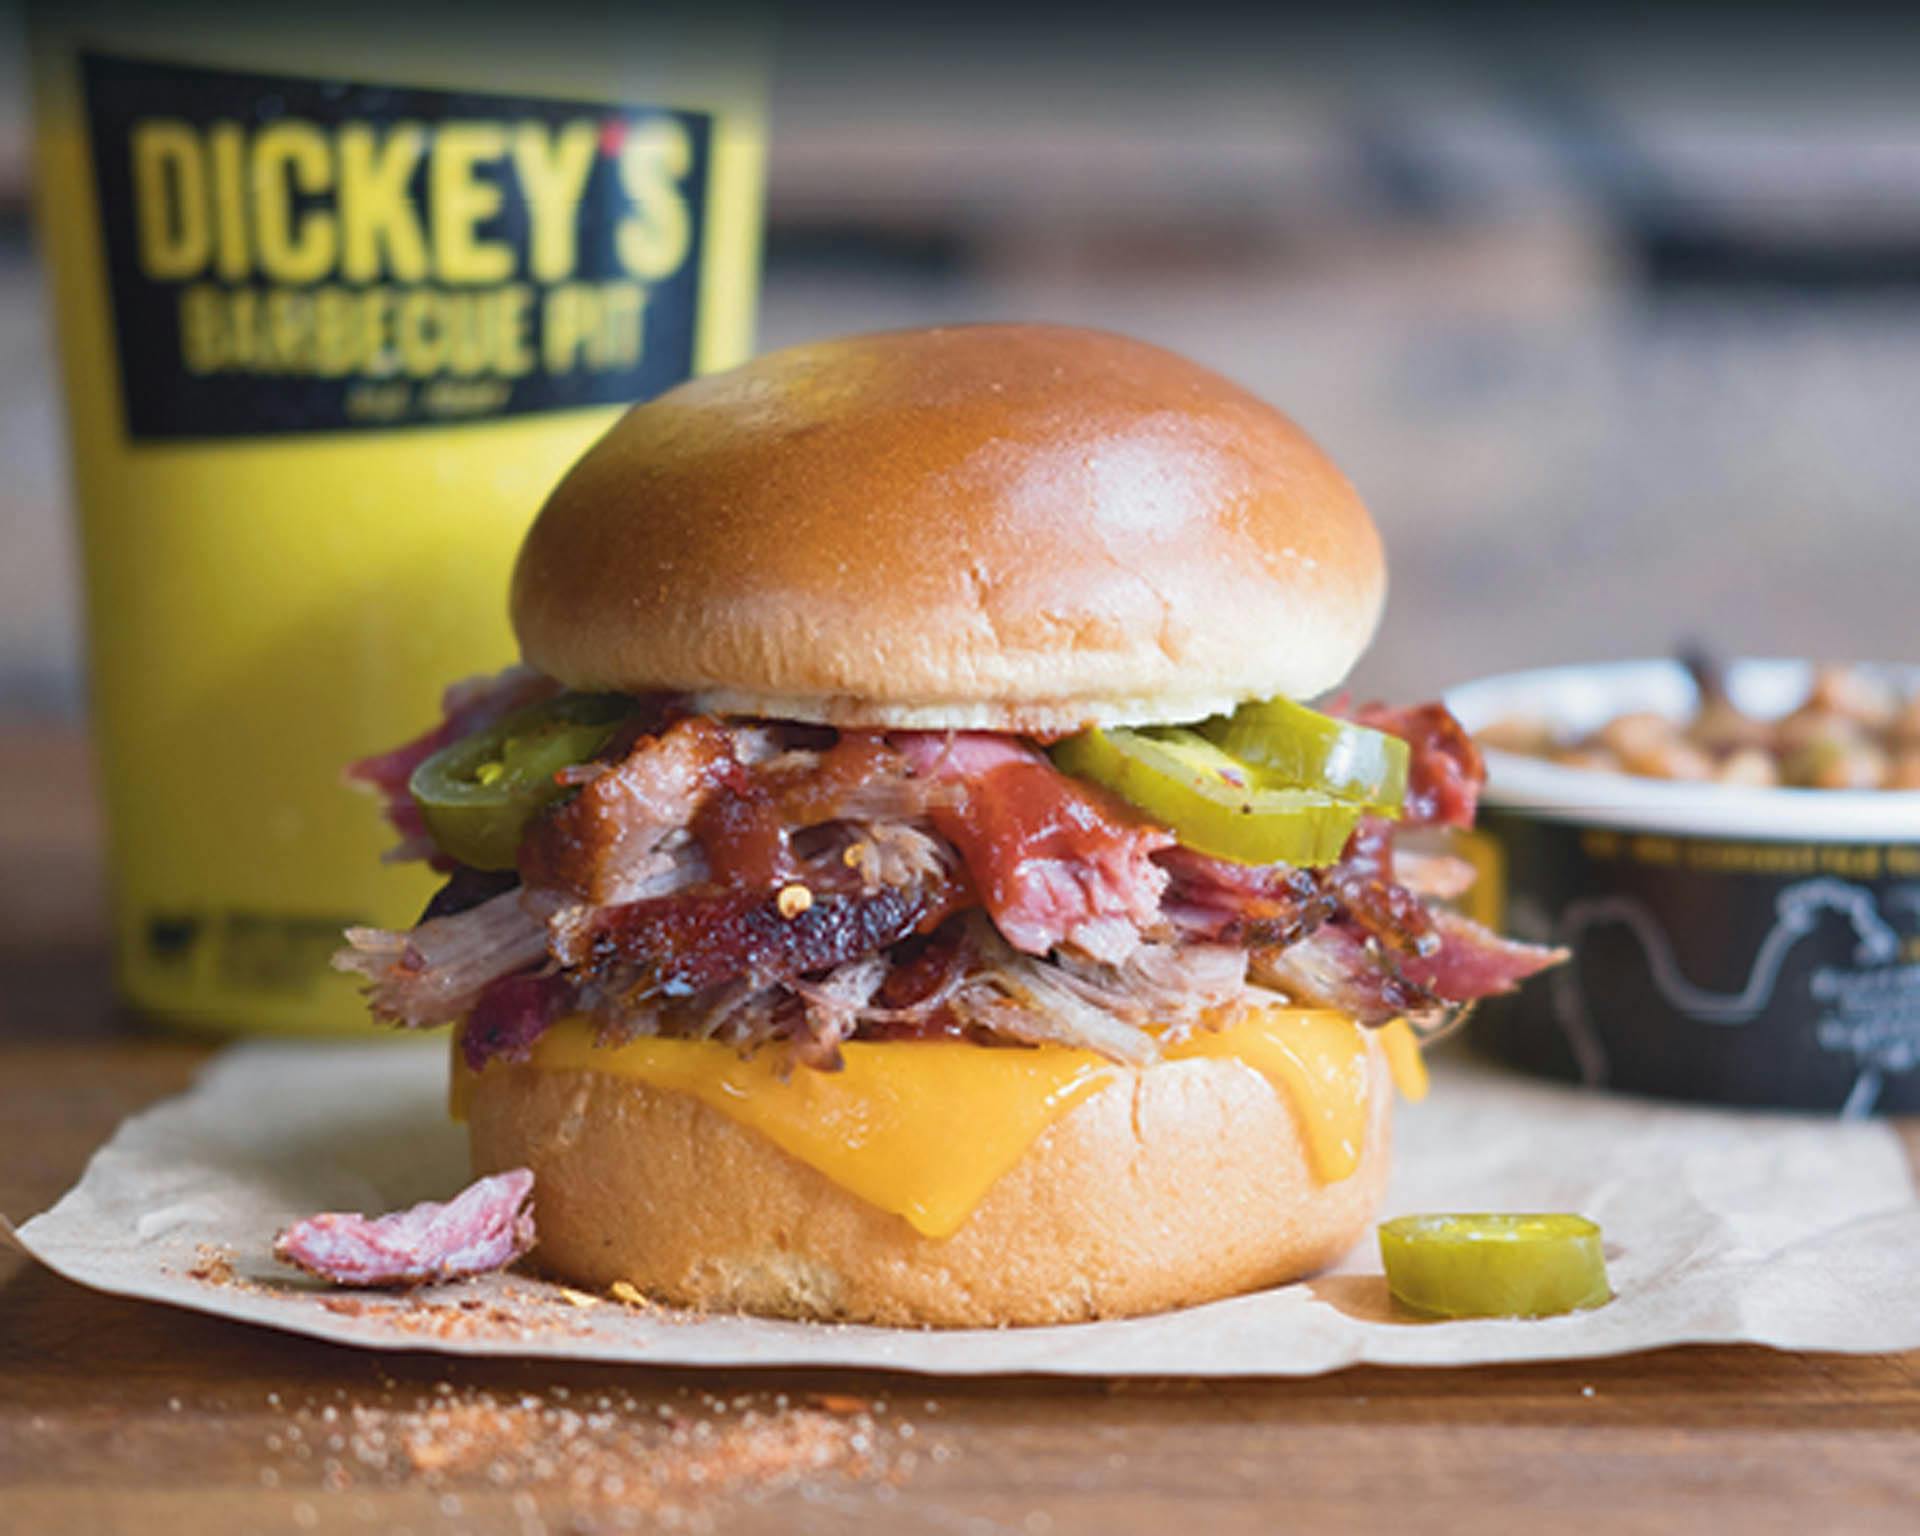 Meat + Poultry: Dickey's spices up its pulled pork sandwich